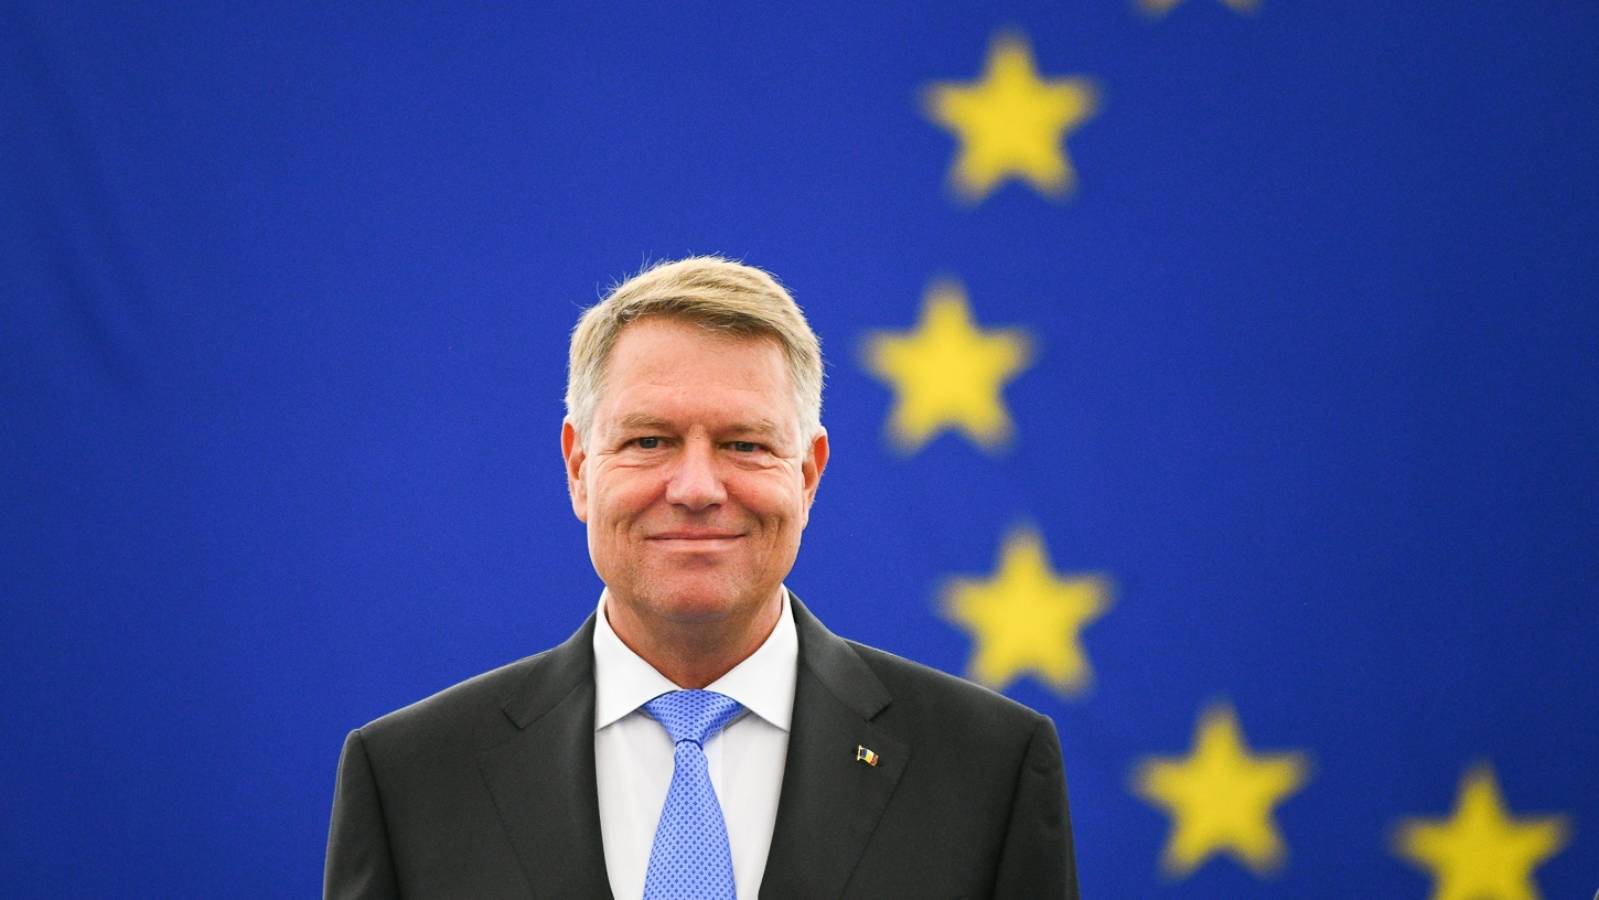 Klaus Iohannis byvaccination